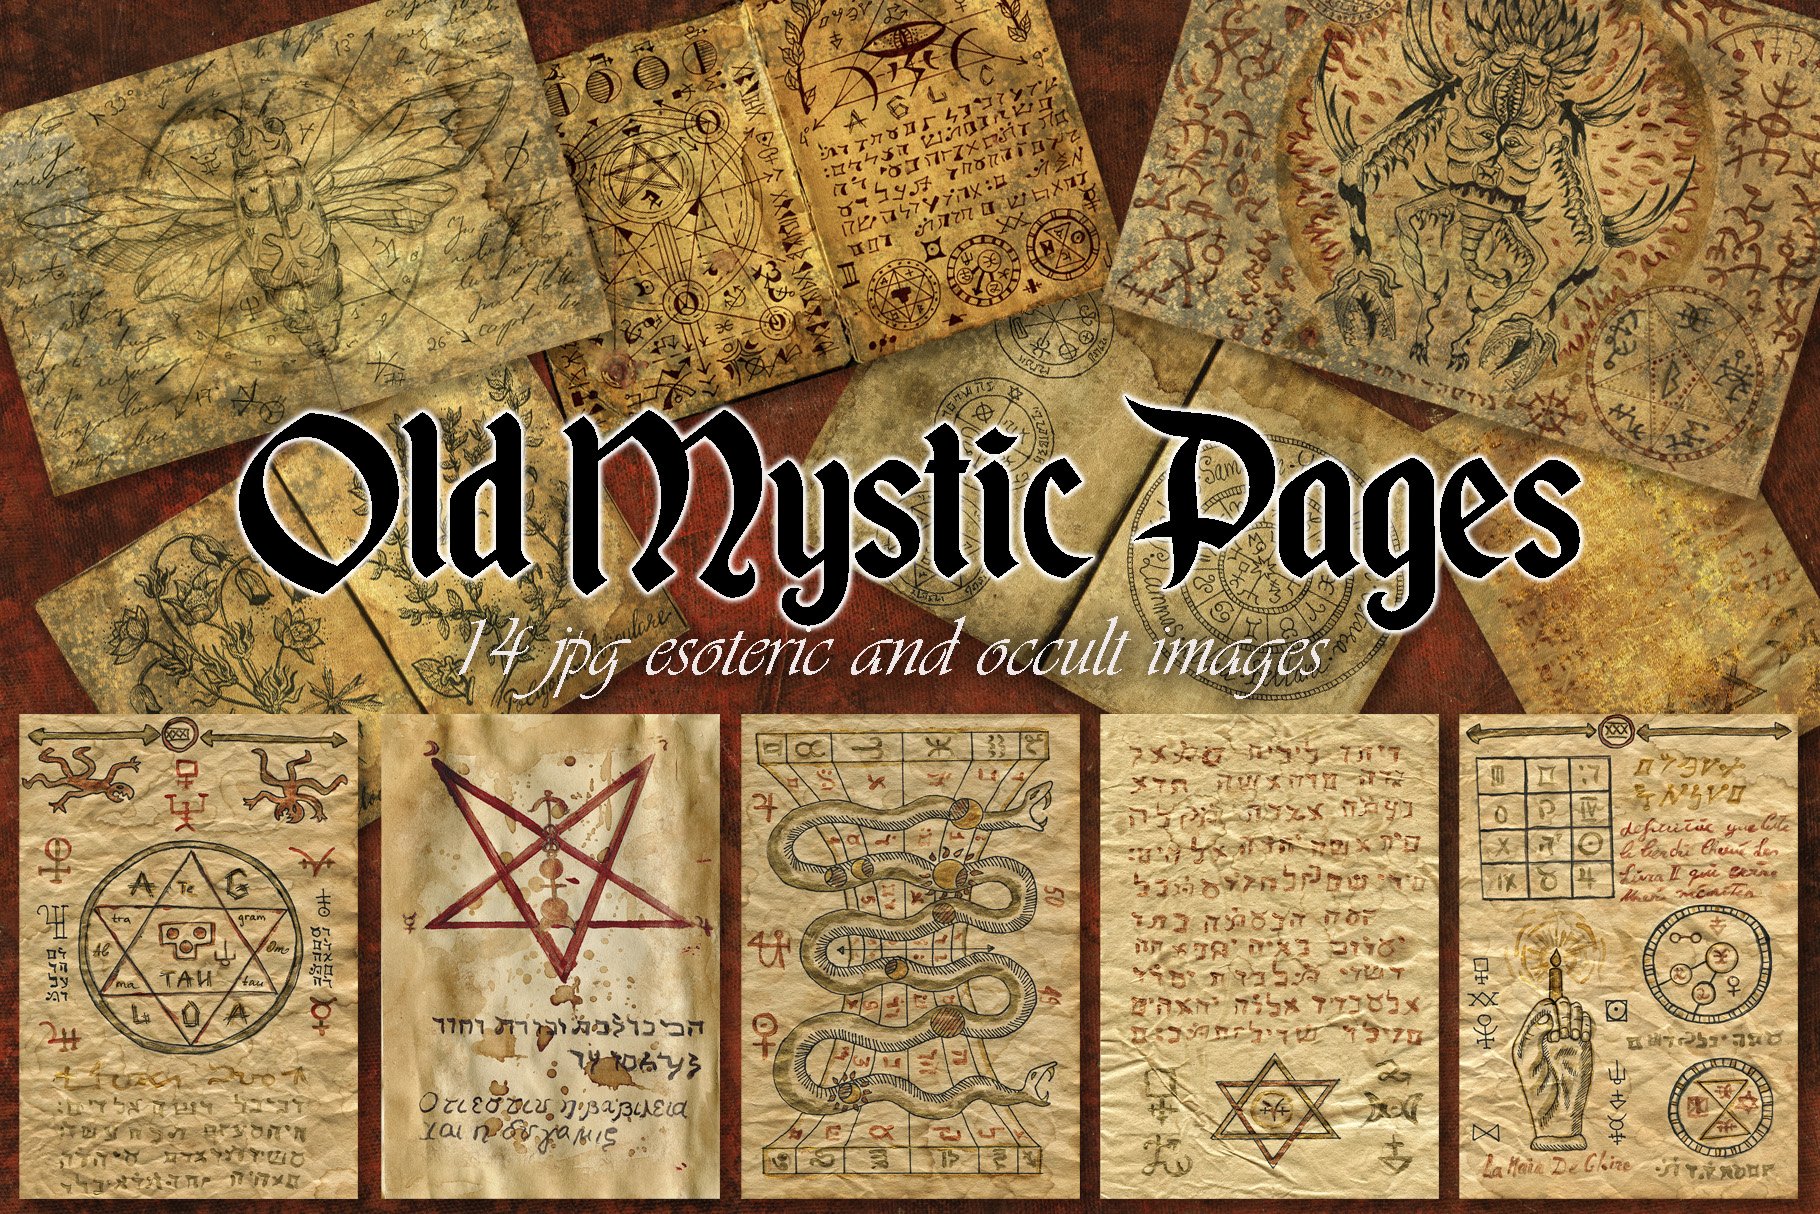 Old Mystic Pages cover image.